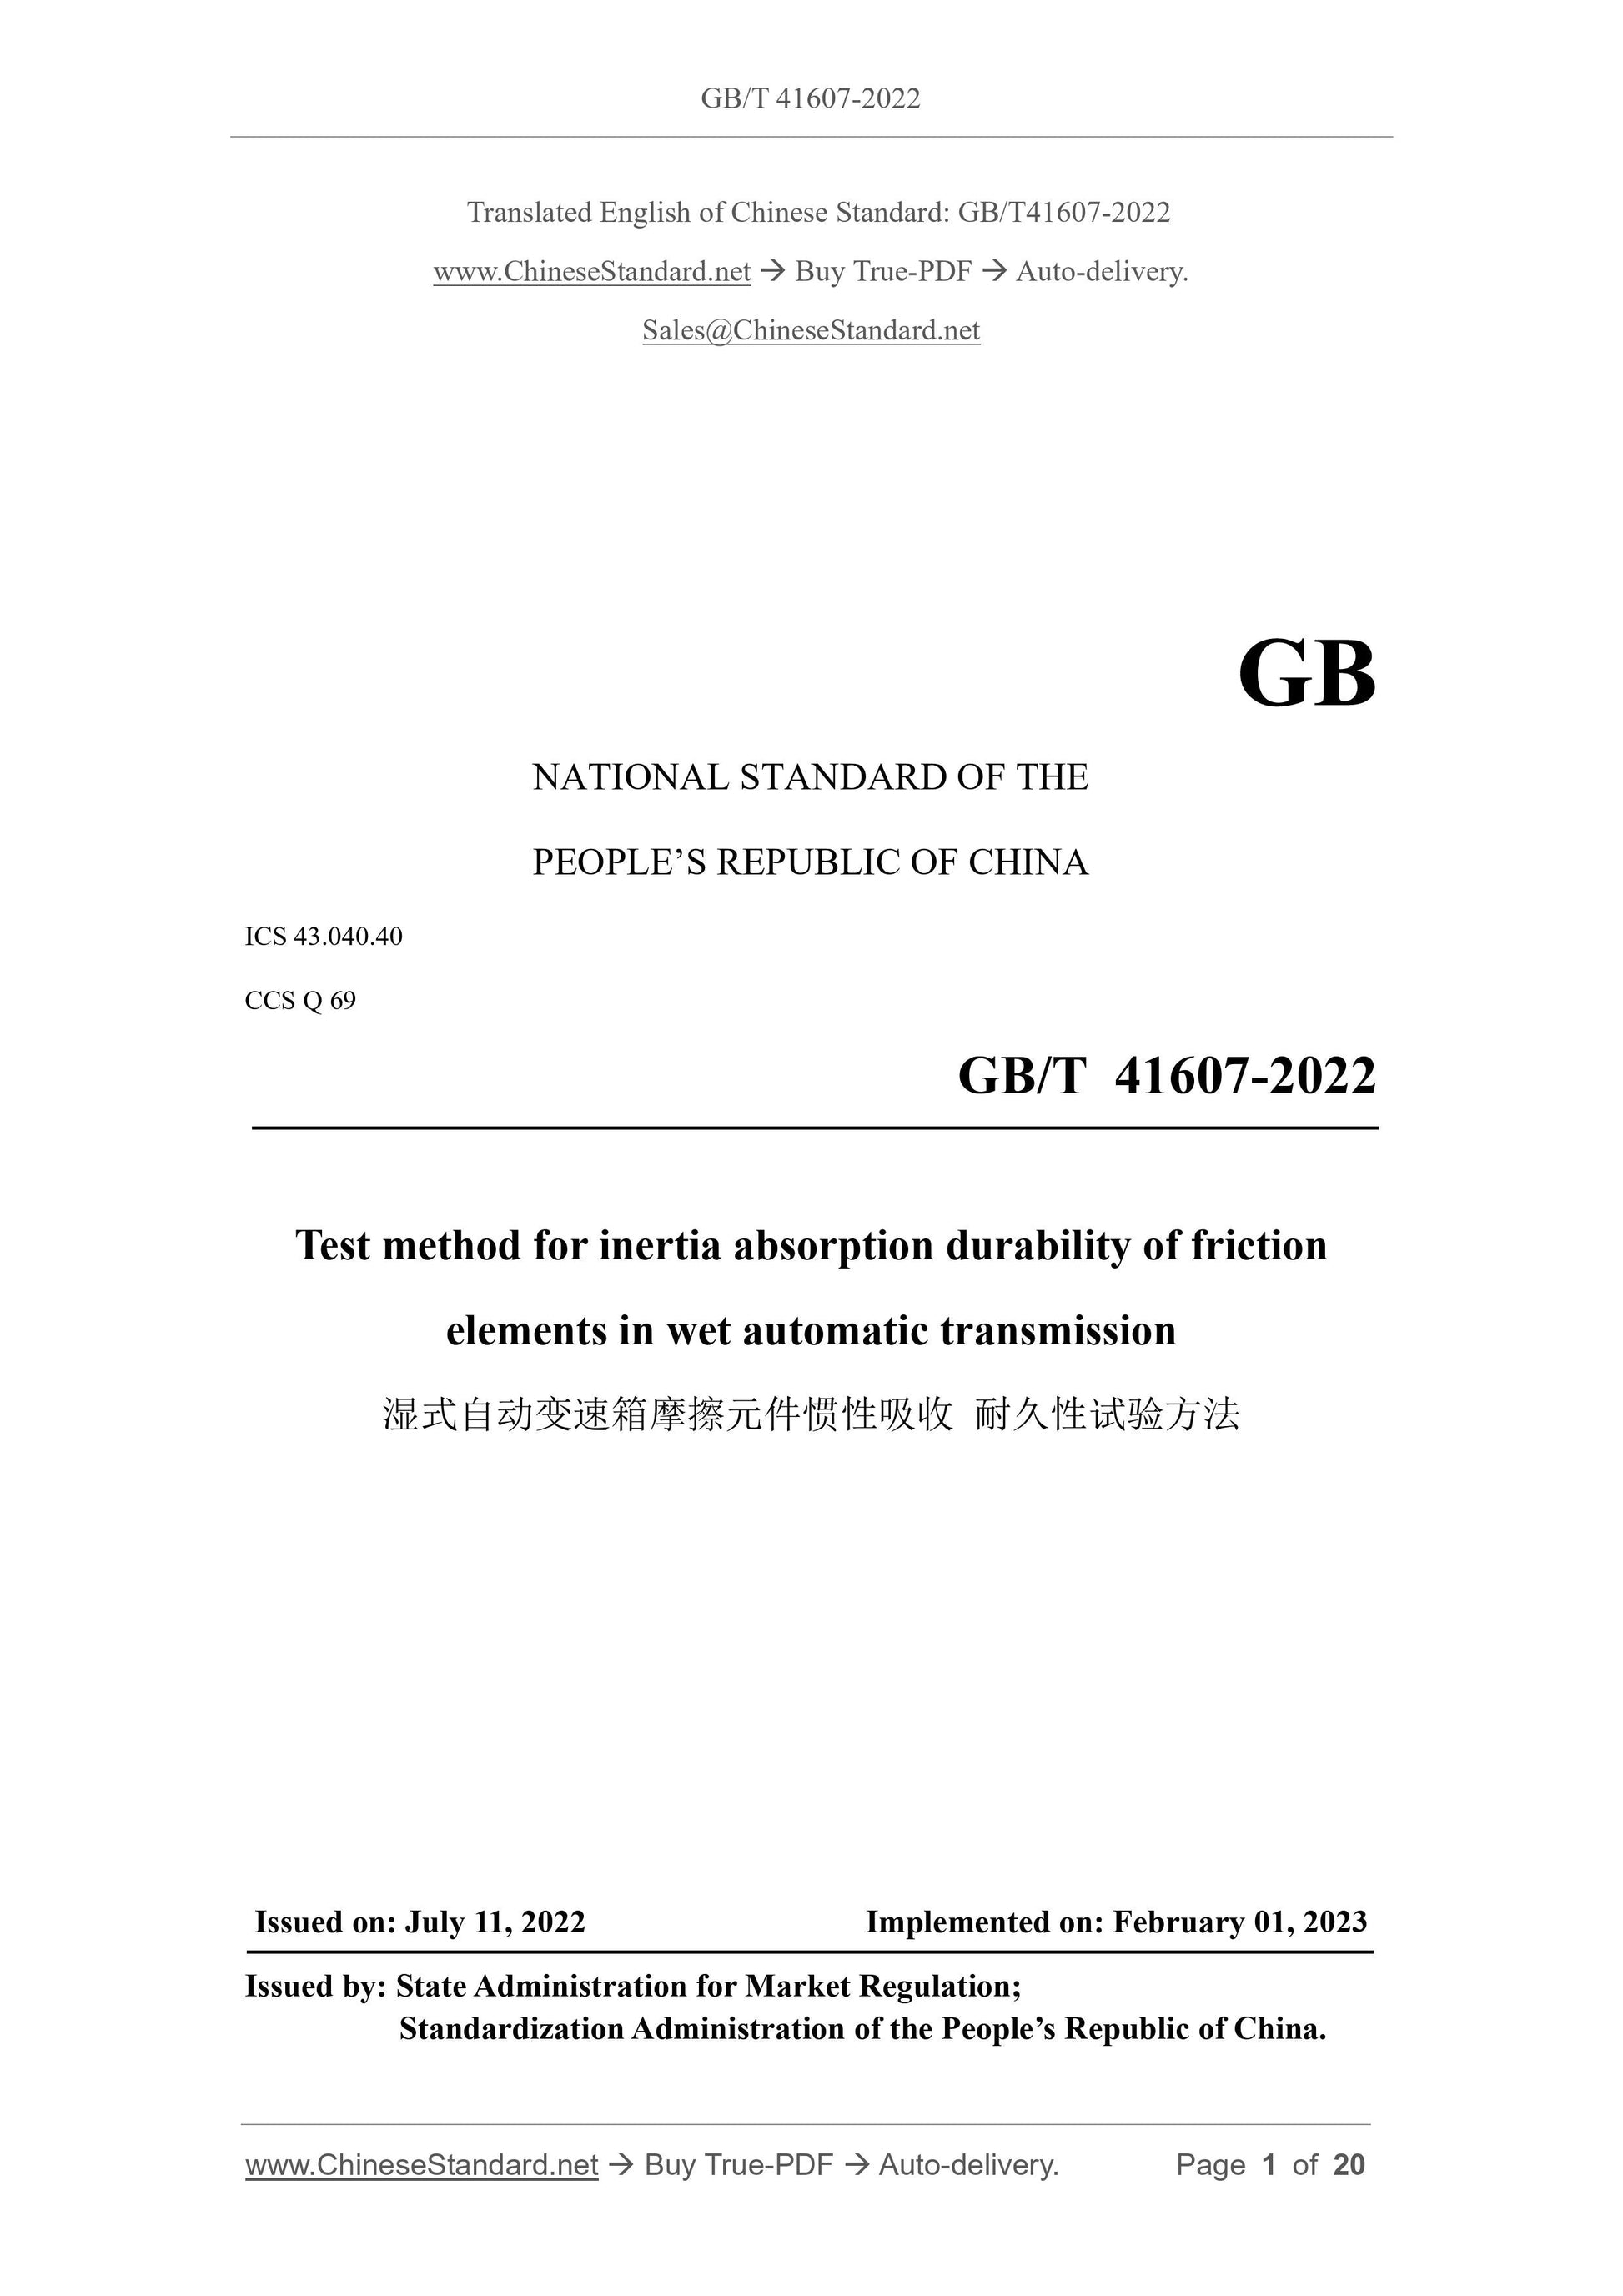 GB/T 41607-2022 Page 1